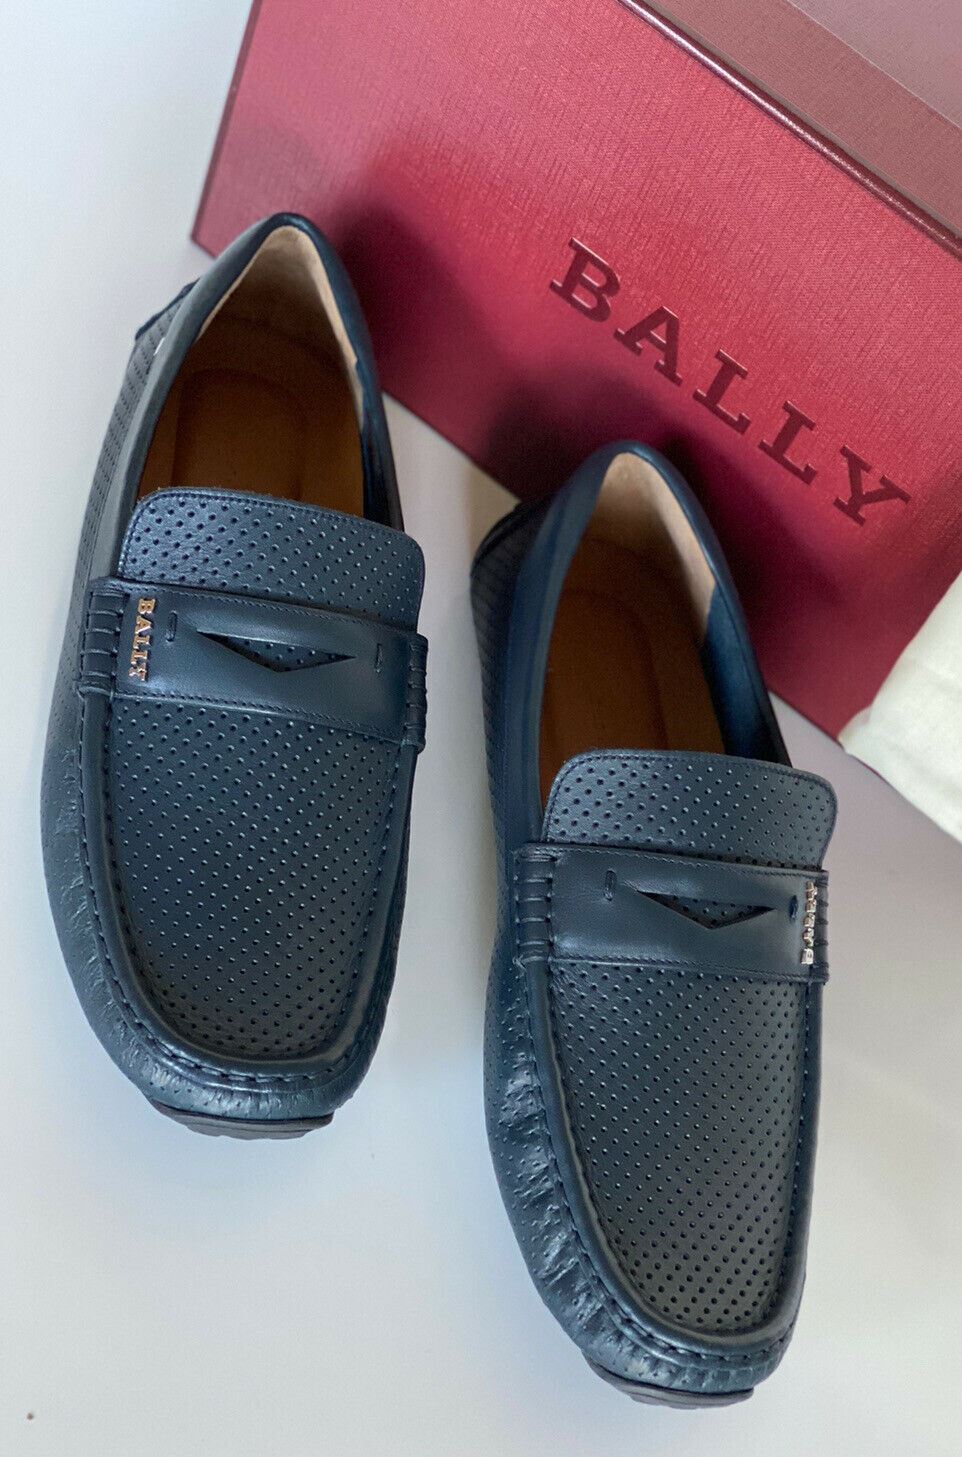 NIB Bally Mens  Perforated Calf Leather Driver Loafers Shoes  Blue 8 US 6231355